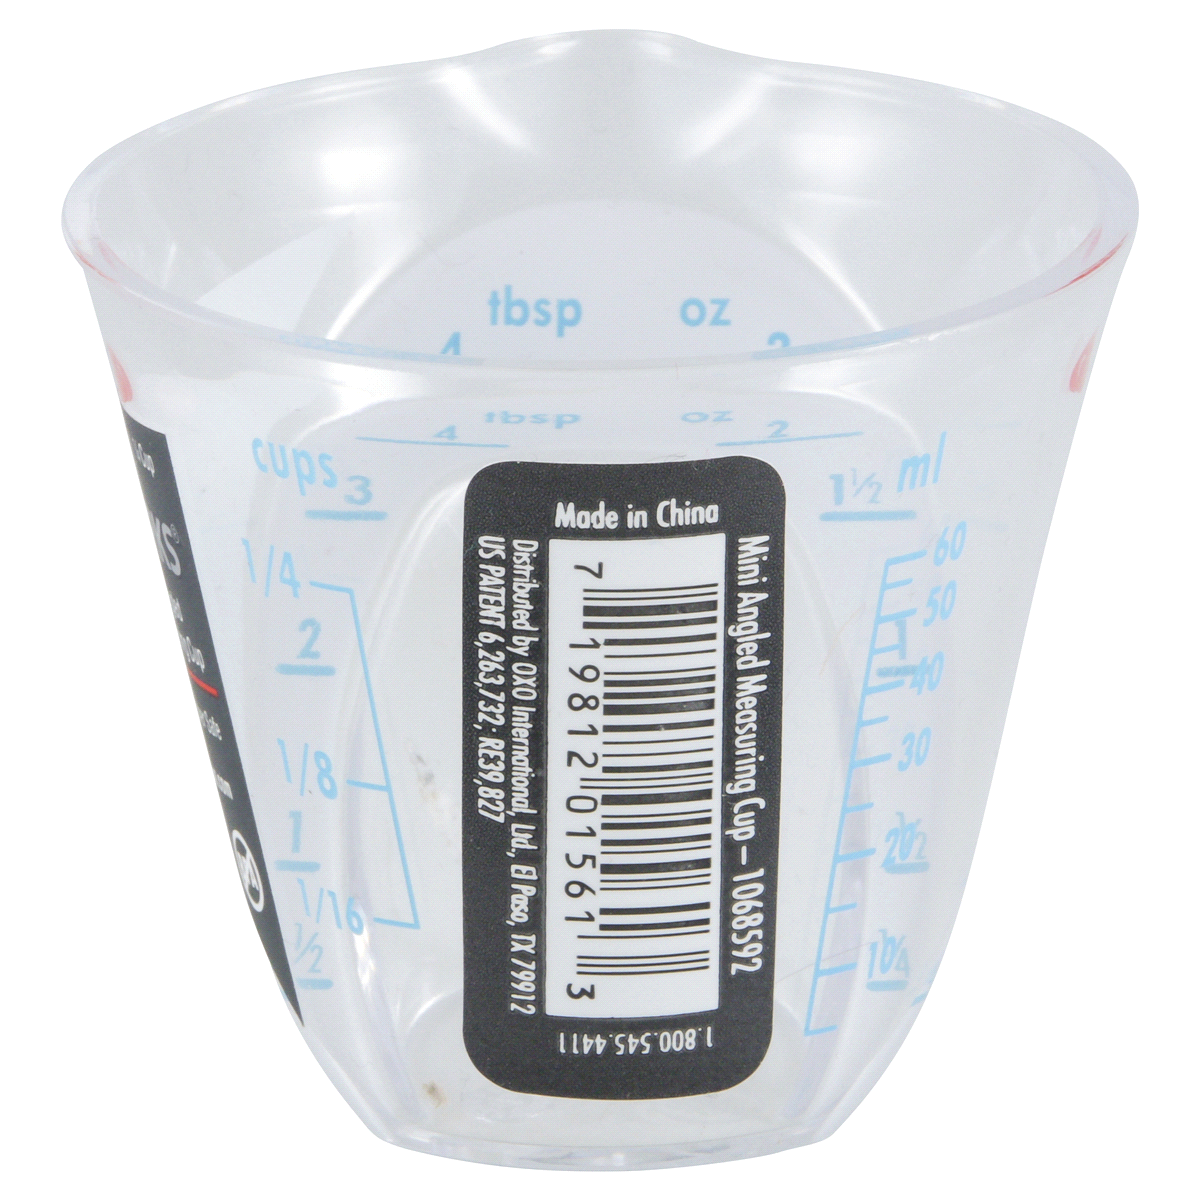 Oxo Good Grips Mini Angled Measuring Cup 1/4 cups